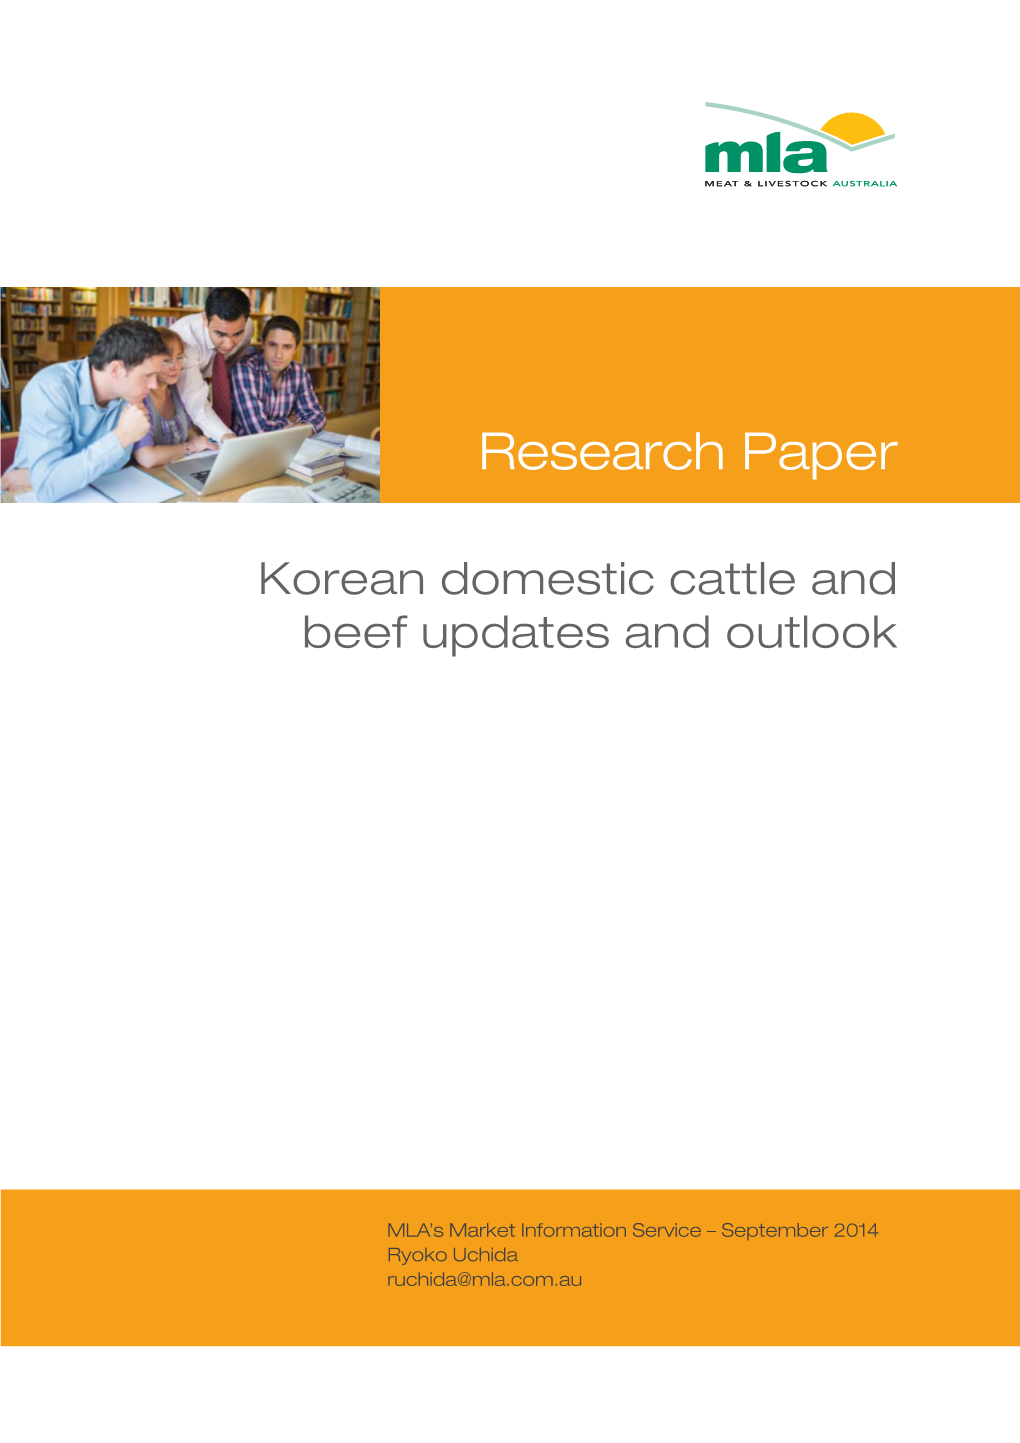 Korean Domestic Cattle and Beef Updates and Outlook